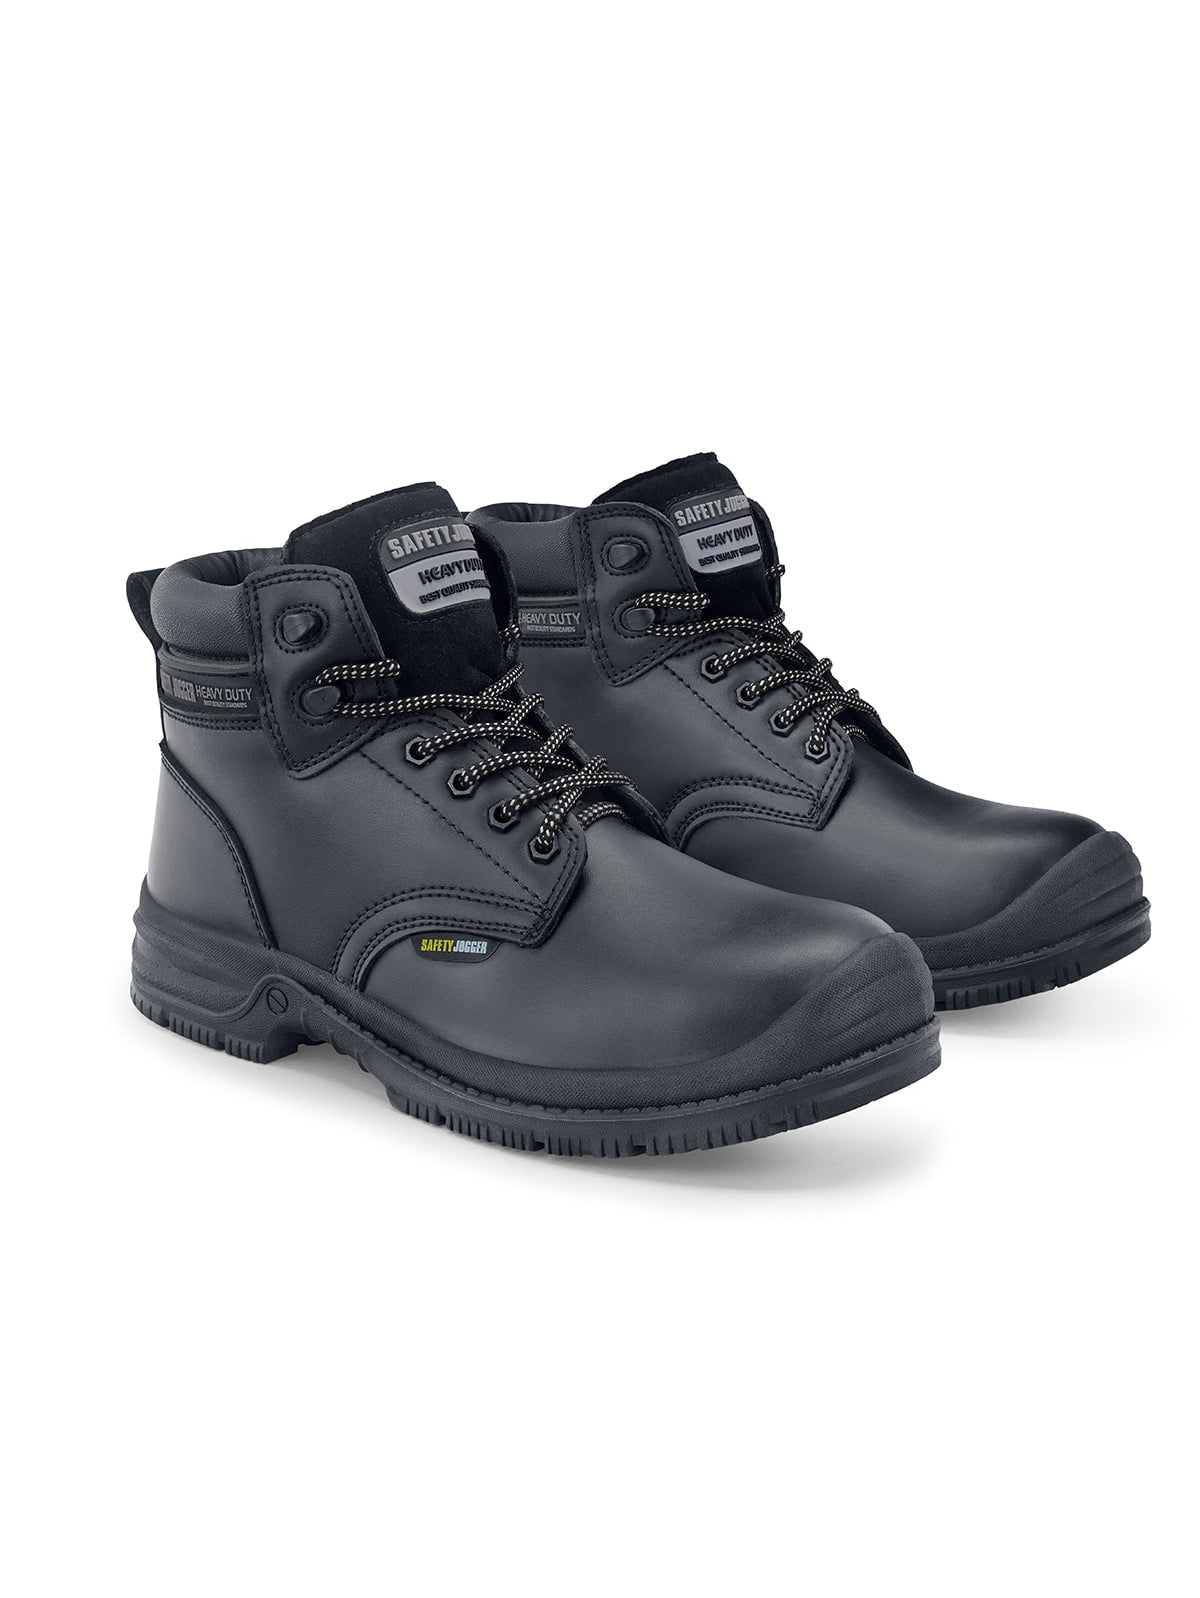 Unisex Safety Shoe X1100N81 (S3) by Shoes For Crews -  ChefsCotton